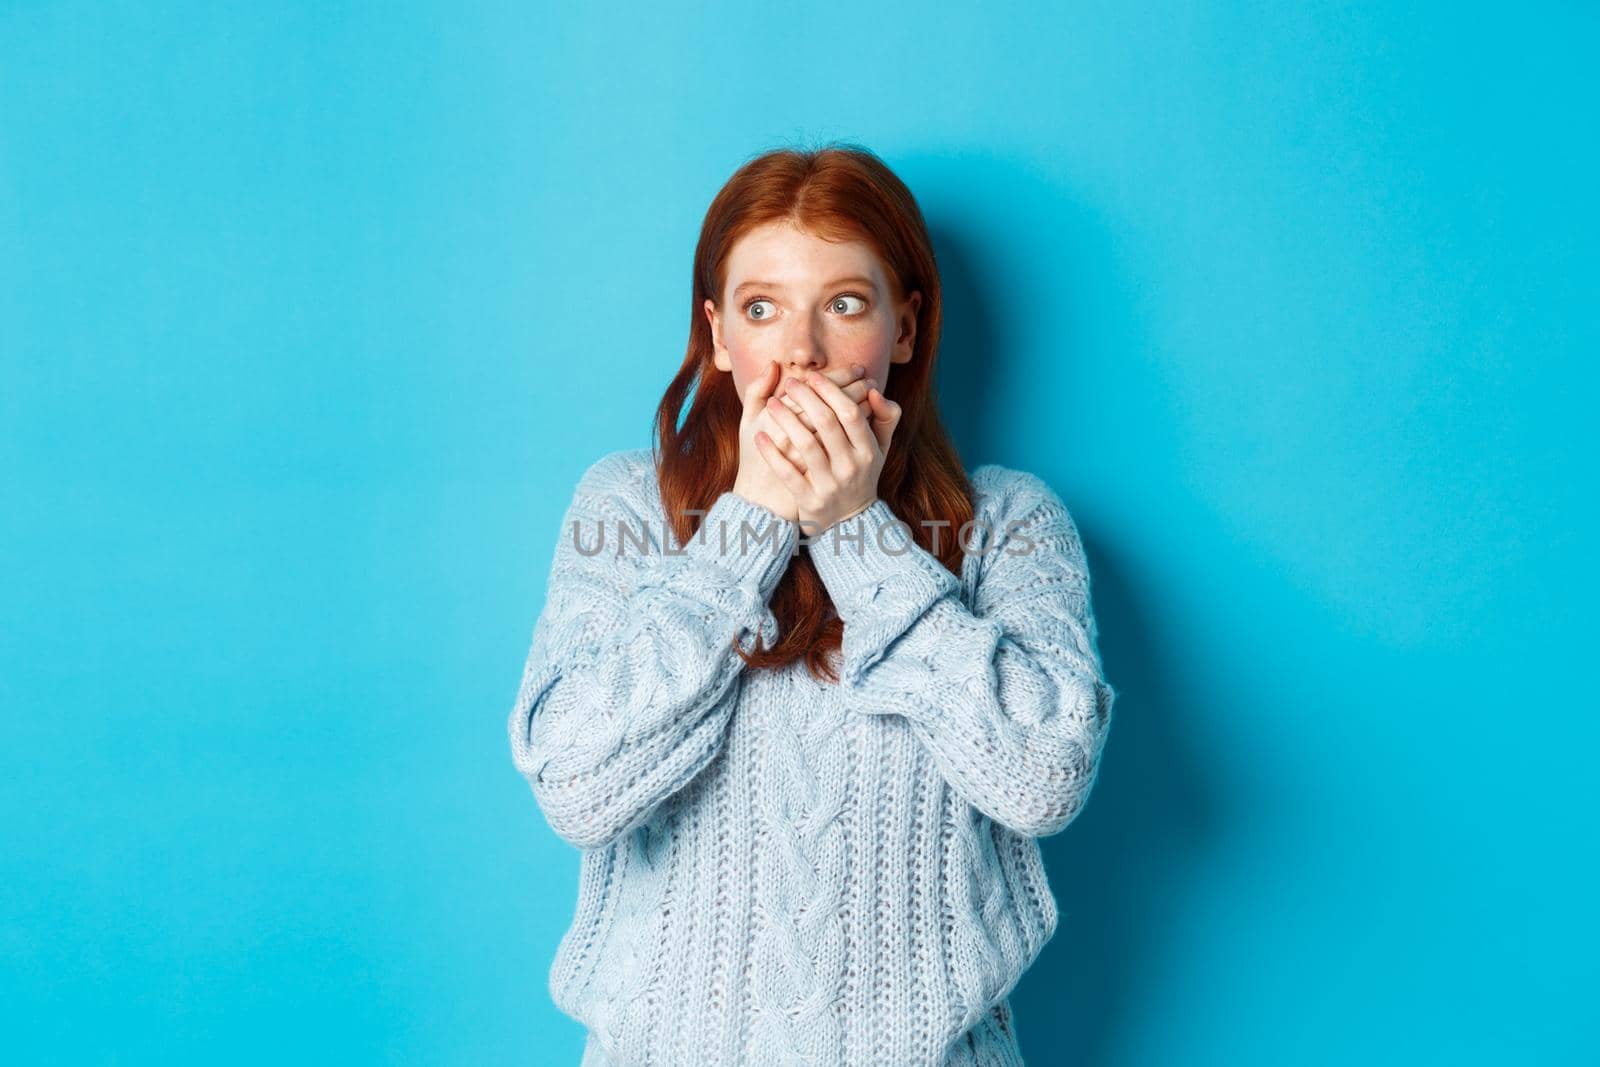 Shocked and anxious redhead girl staring left scared, covering mouth and gasping, standing over blue background in sweater.